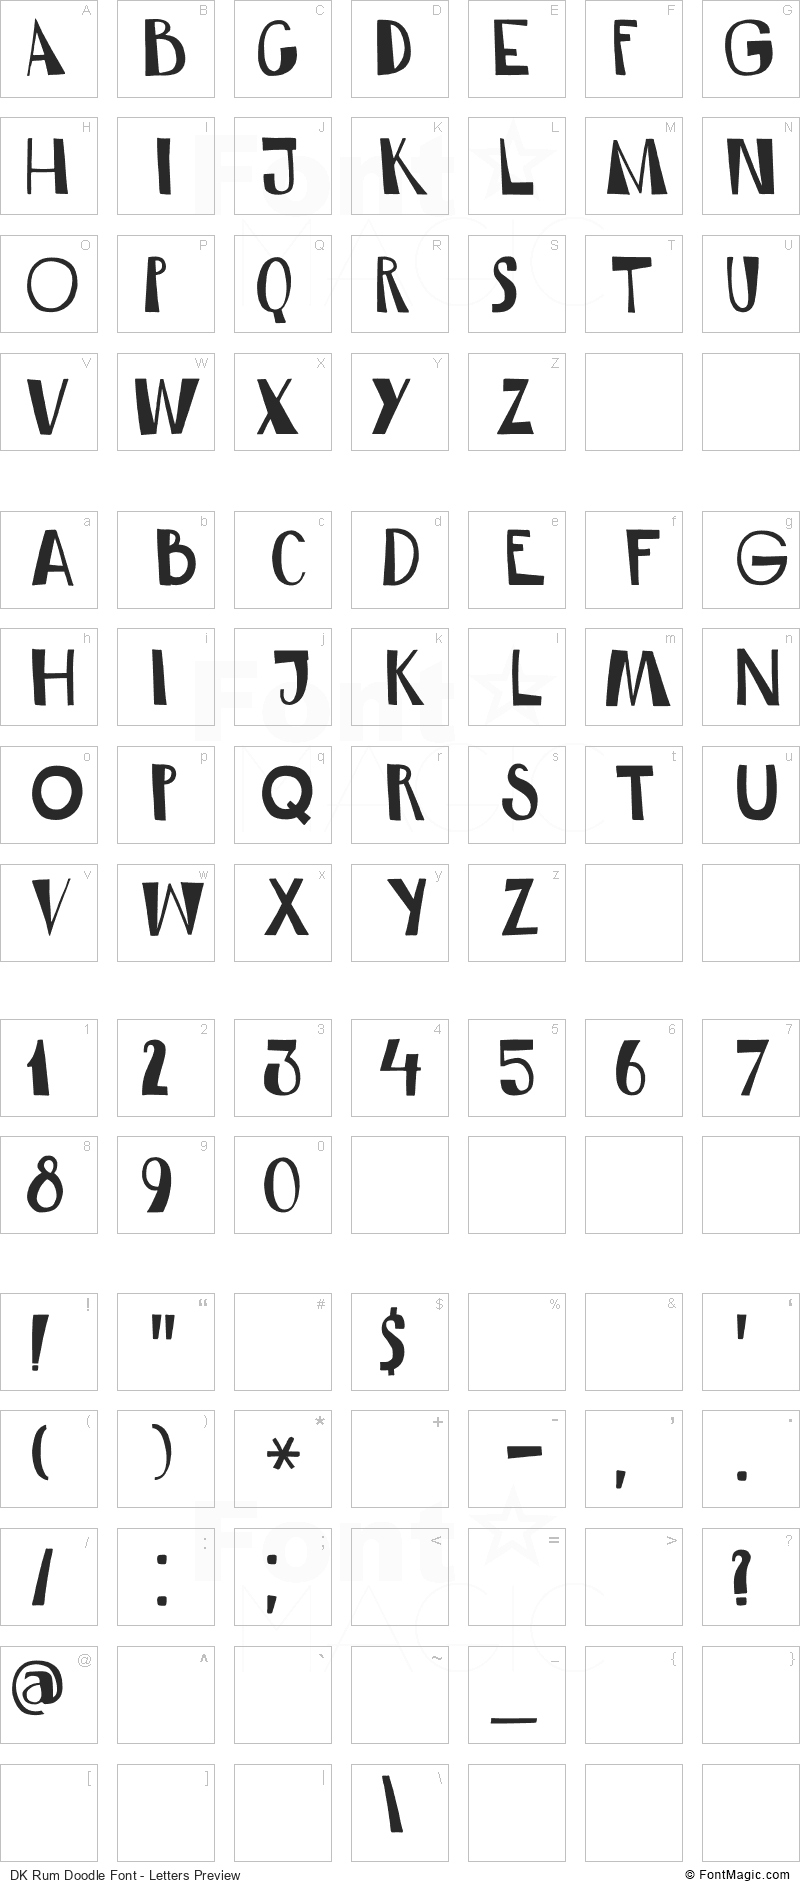 DK Rum Doodle Font - All Latters Preview Chart